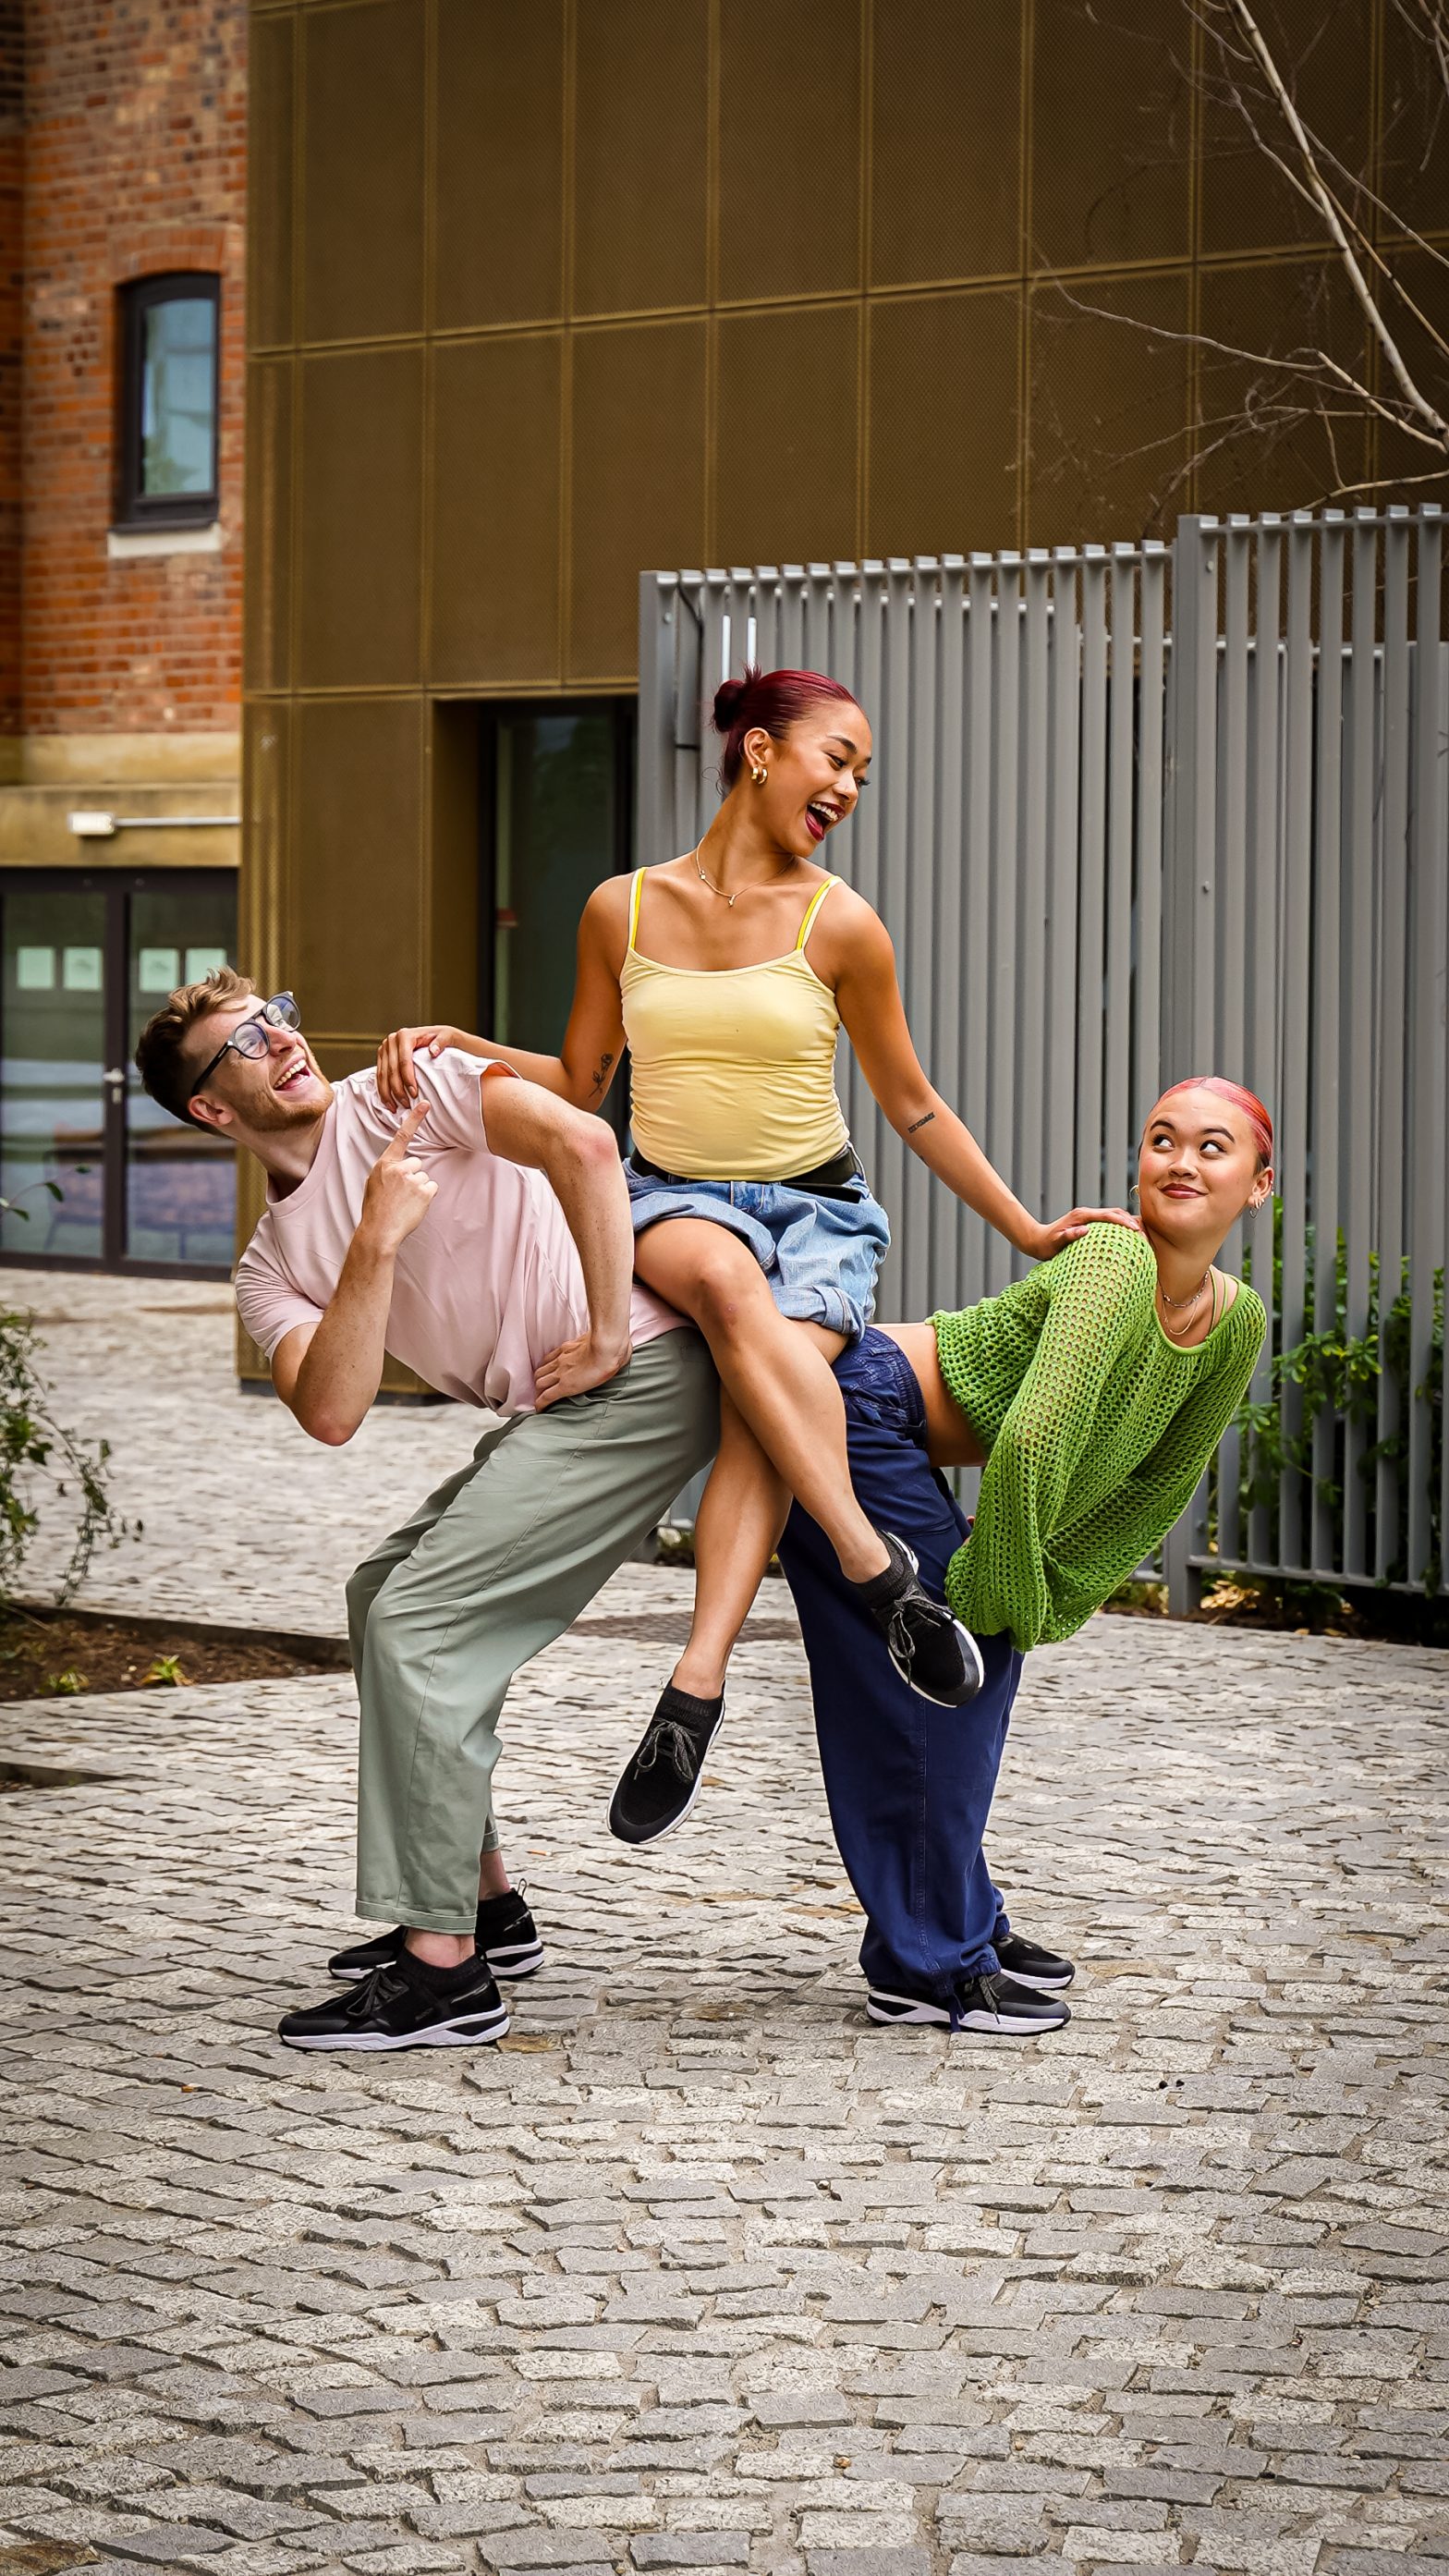 Three people dance o the street. Two are lifting one person up.